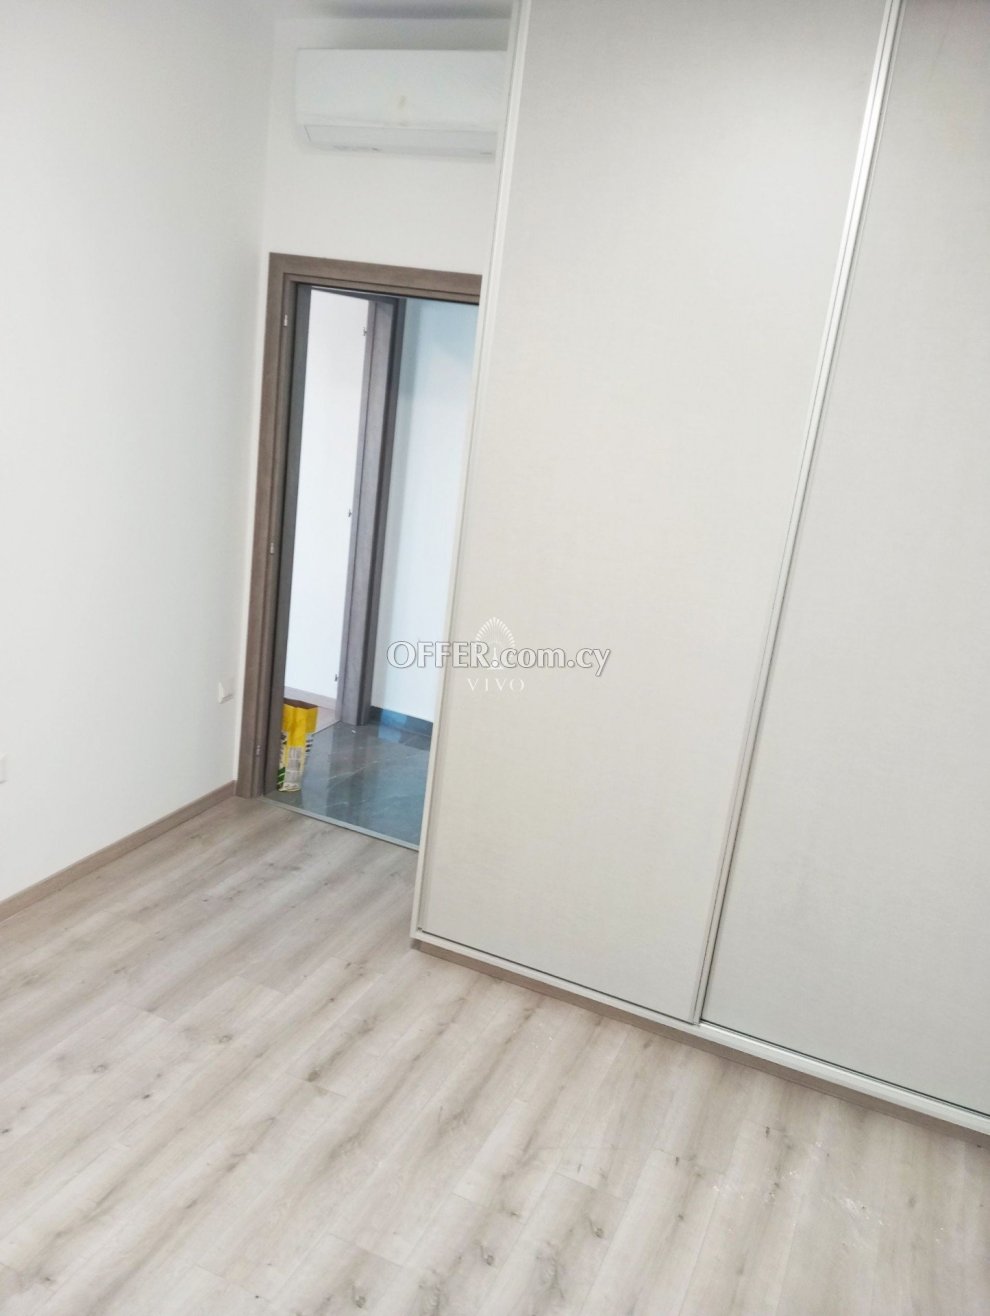 BRAND NEW TWO BEDROOM APARTMENT CLOSE TO NEW MARINA LIMASSOL - 8